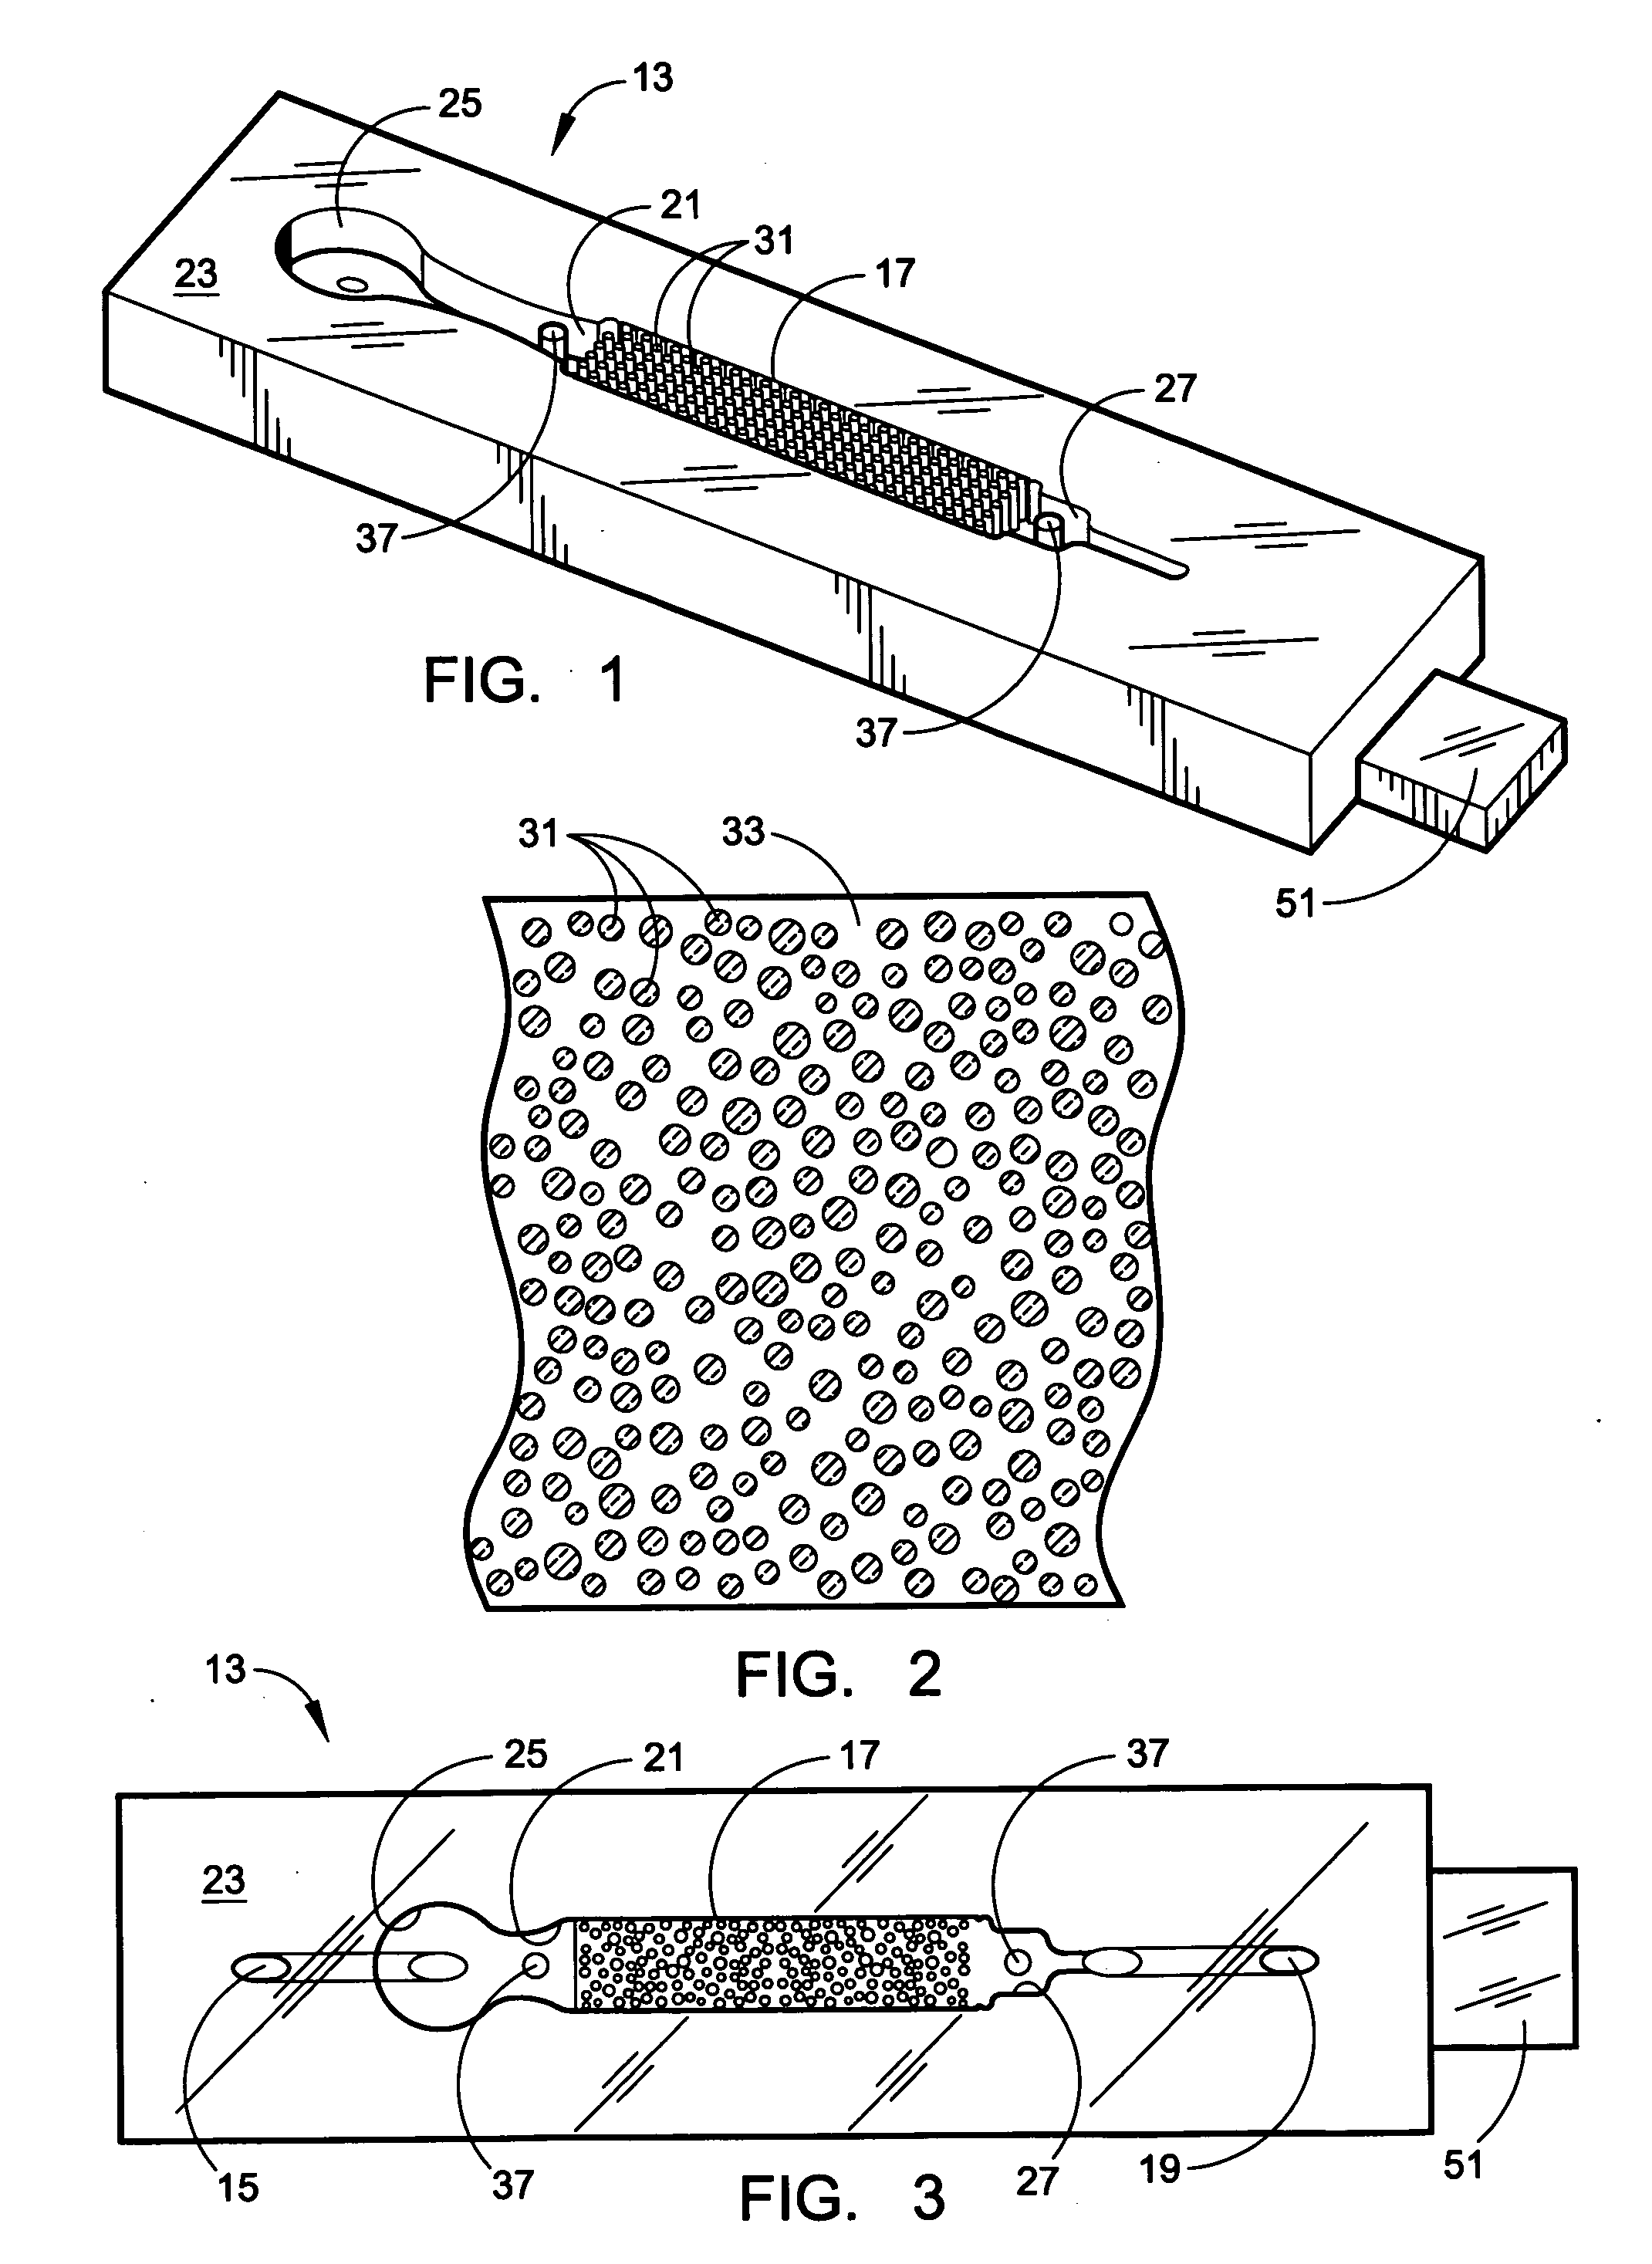 Device for cell separation and analysis and method of using